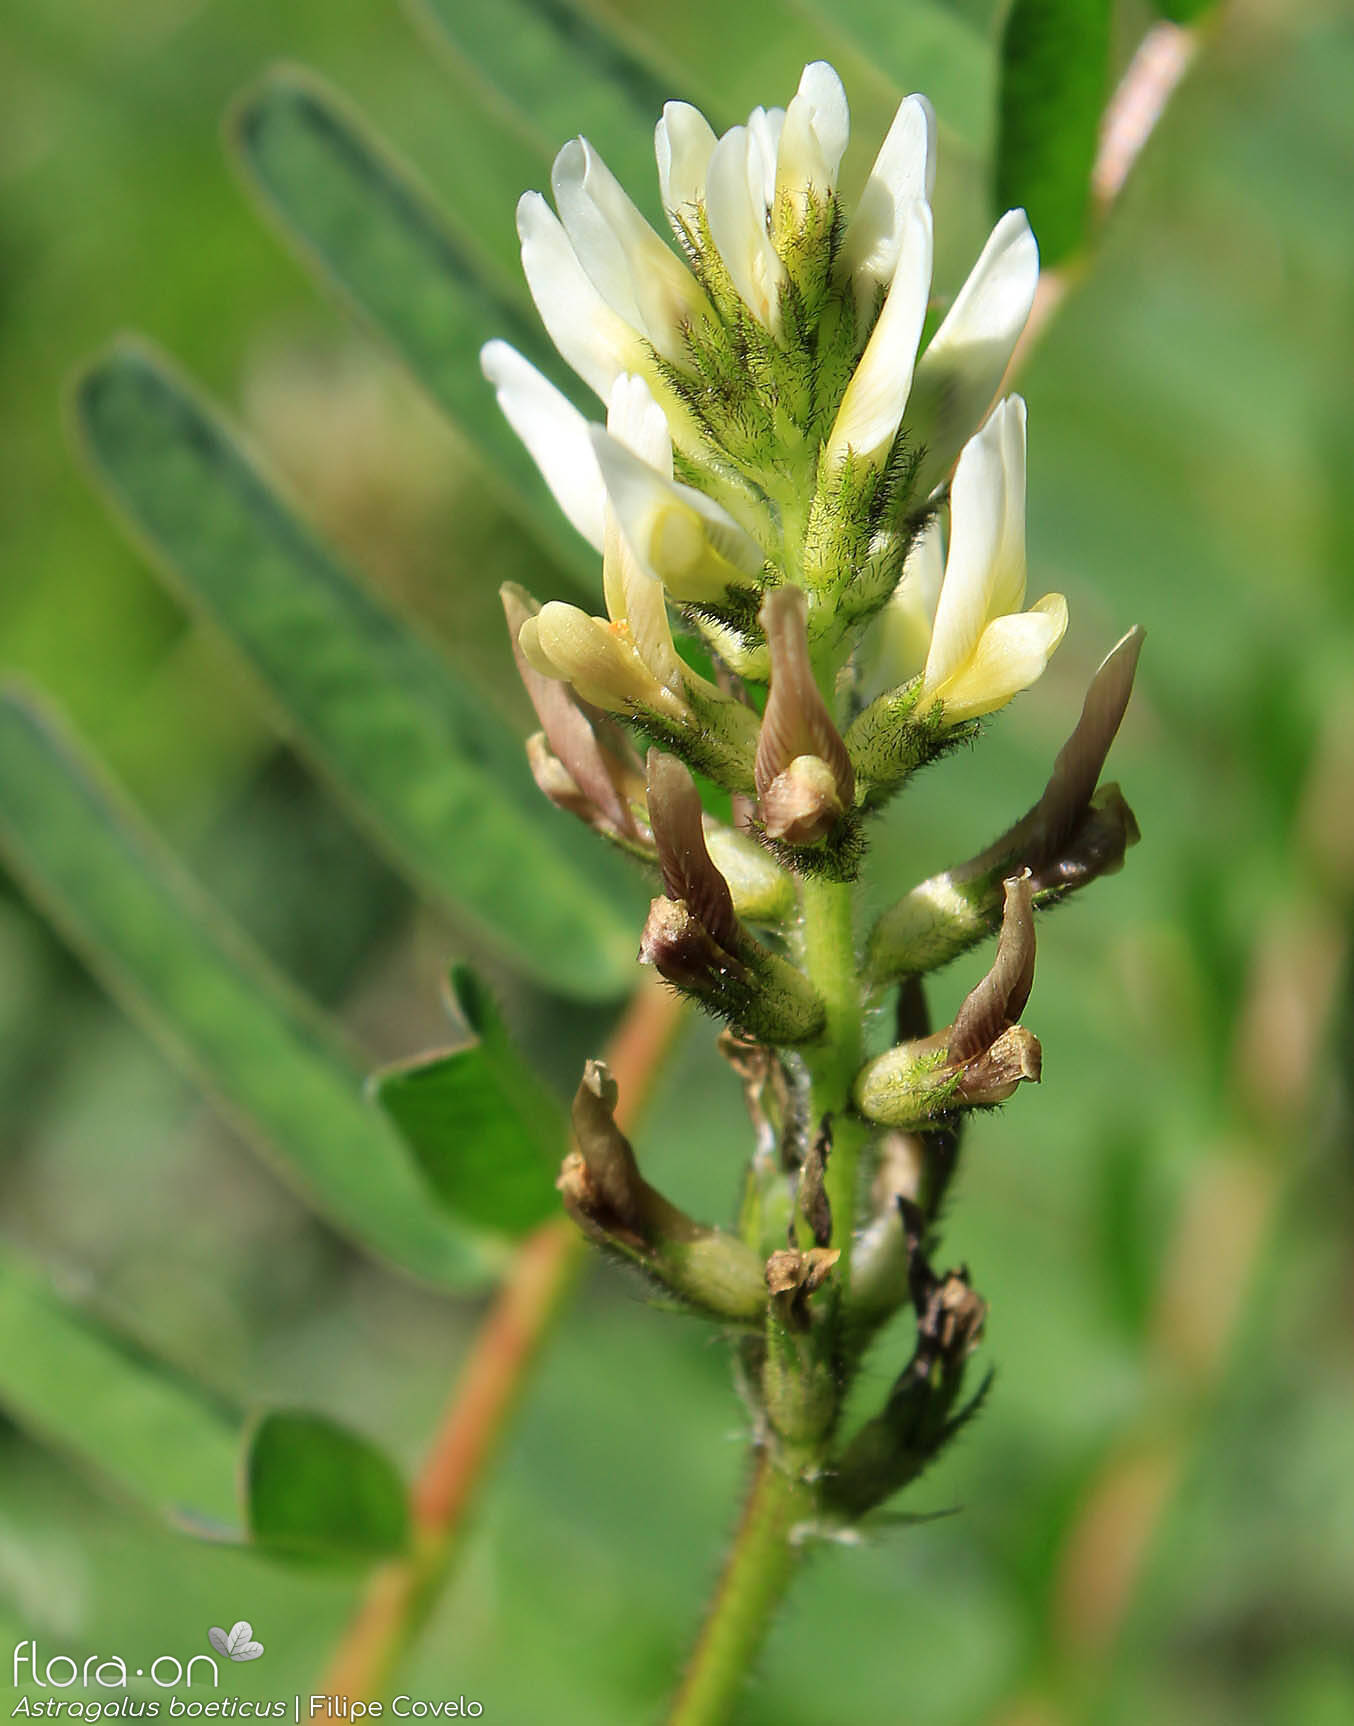 Astragalus boeticus - Flor (geral) | Filipe Covelo; CC BY-NC 4.0